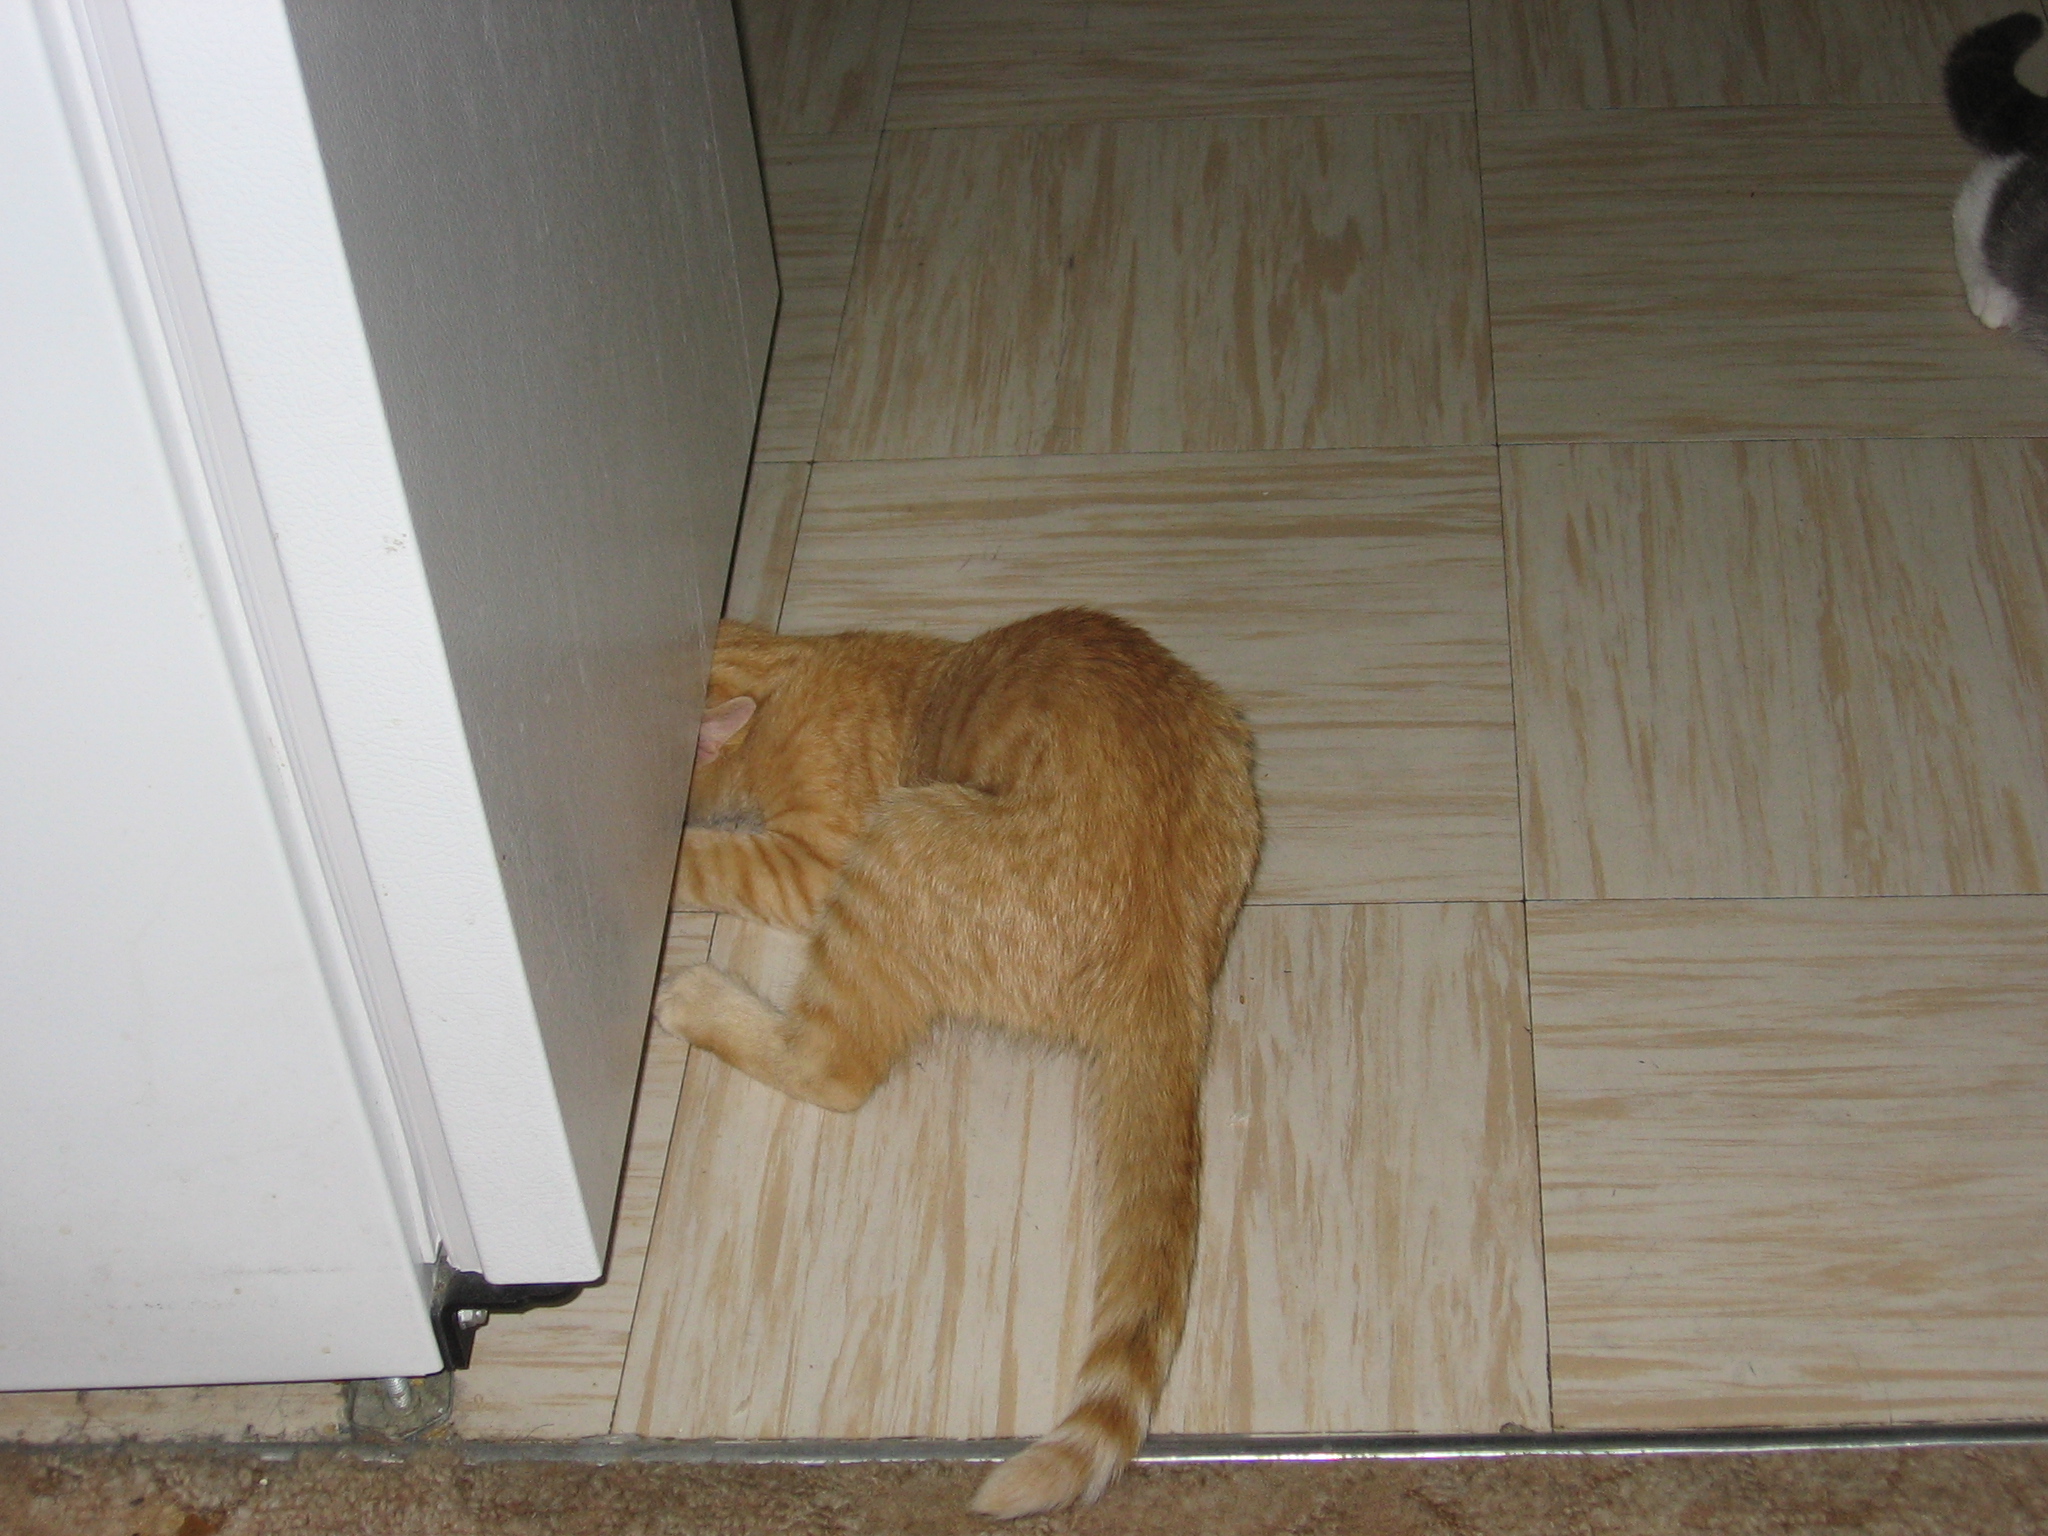 Jack cramming his head under the fridge door to try to get at a treat.